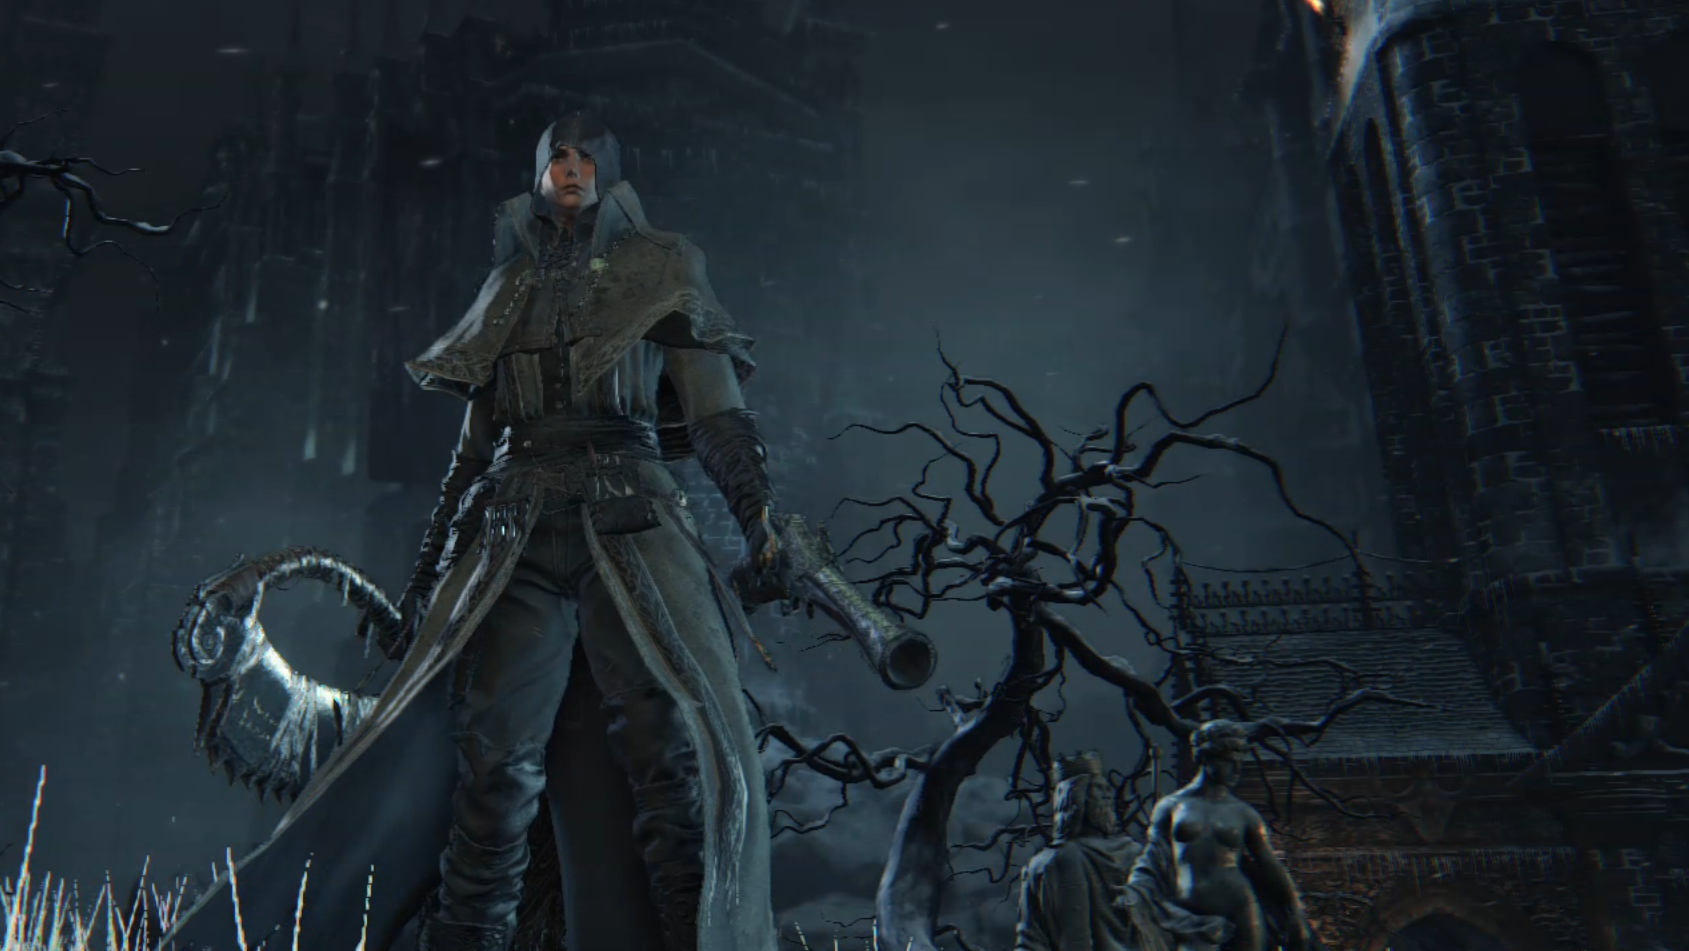 How many of you would buy Bloodborne if it released for PC? : r/gaming